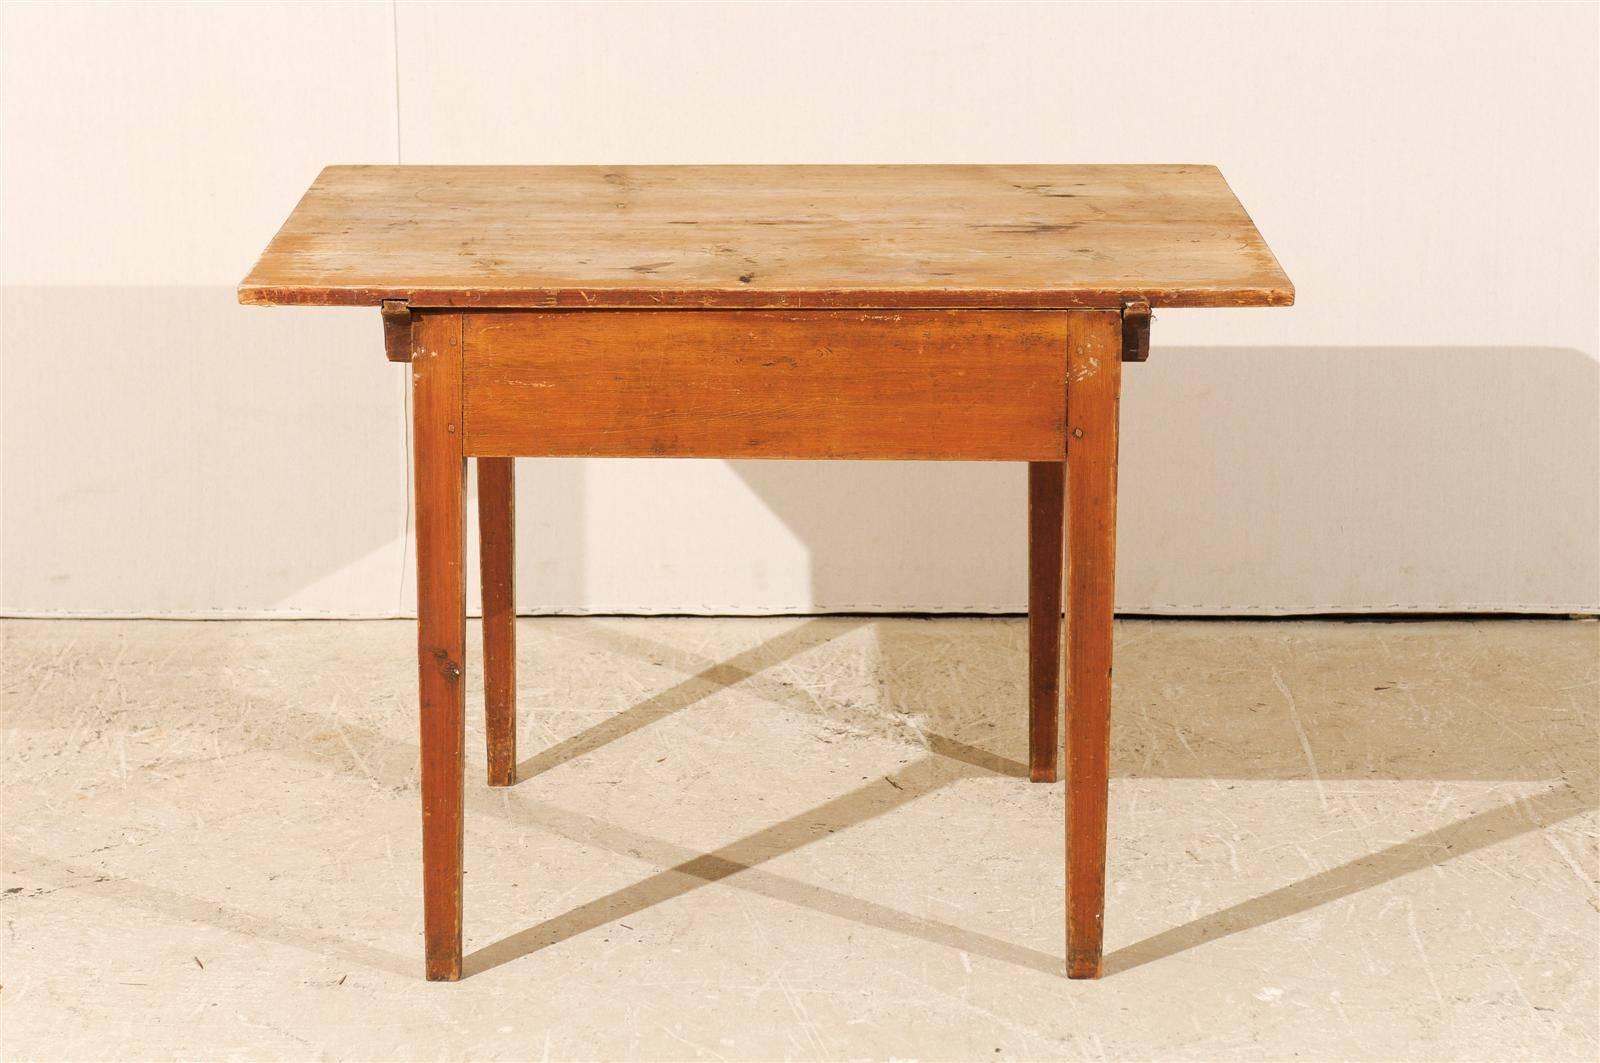 Swedish Single-Drawer Wooden Table, Clean and Simple Lines, Mid-19th Century For Sale 4